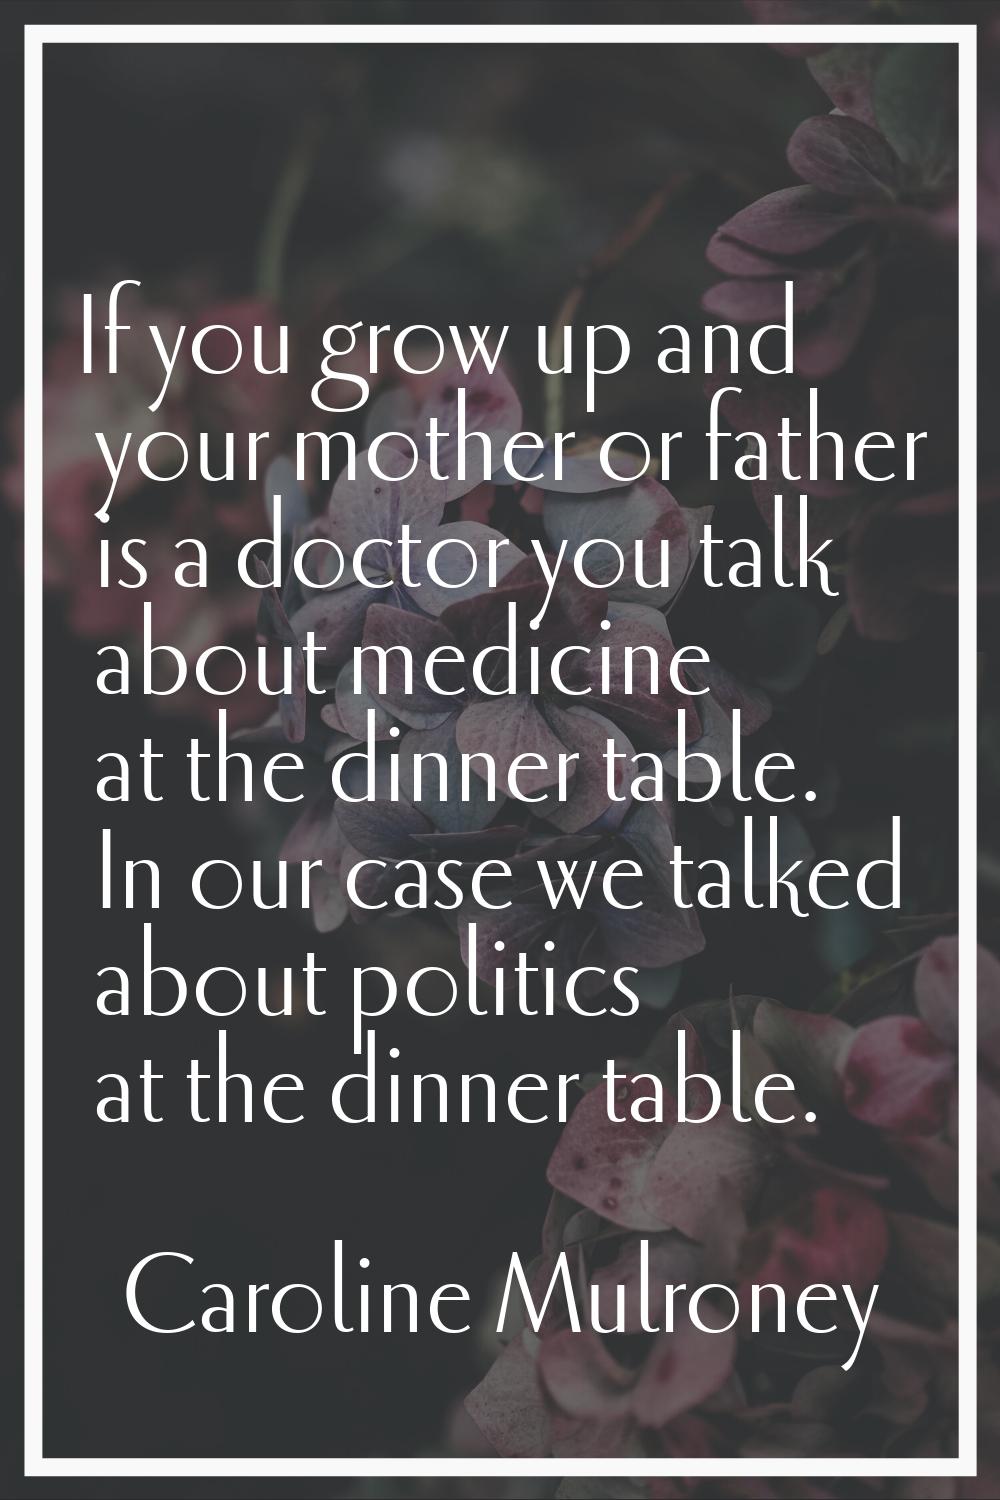 If you grow up and your mother or father is a doctor you talk about medicine at the dinner table. I